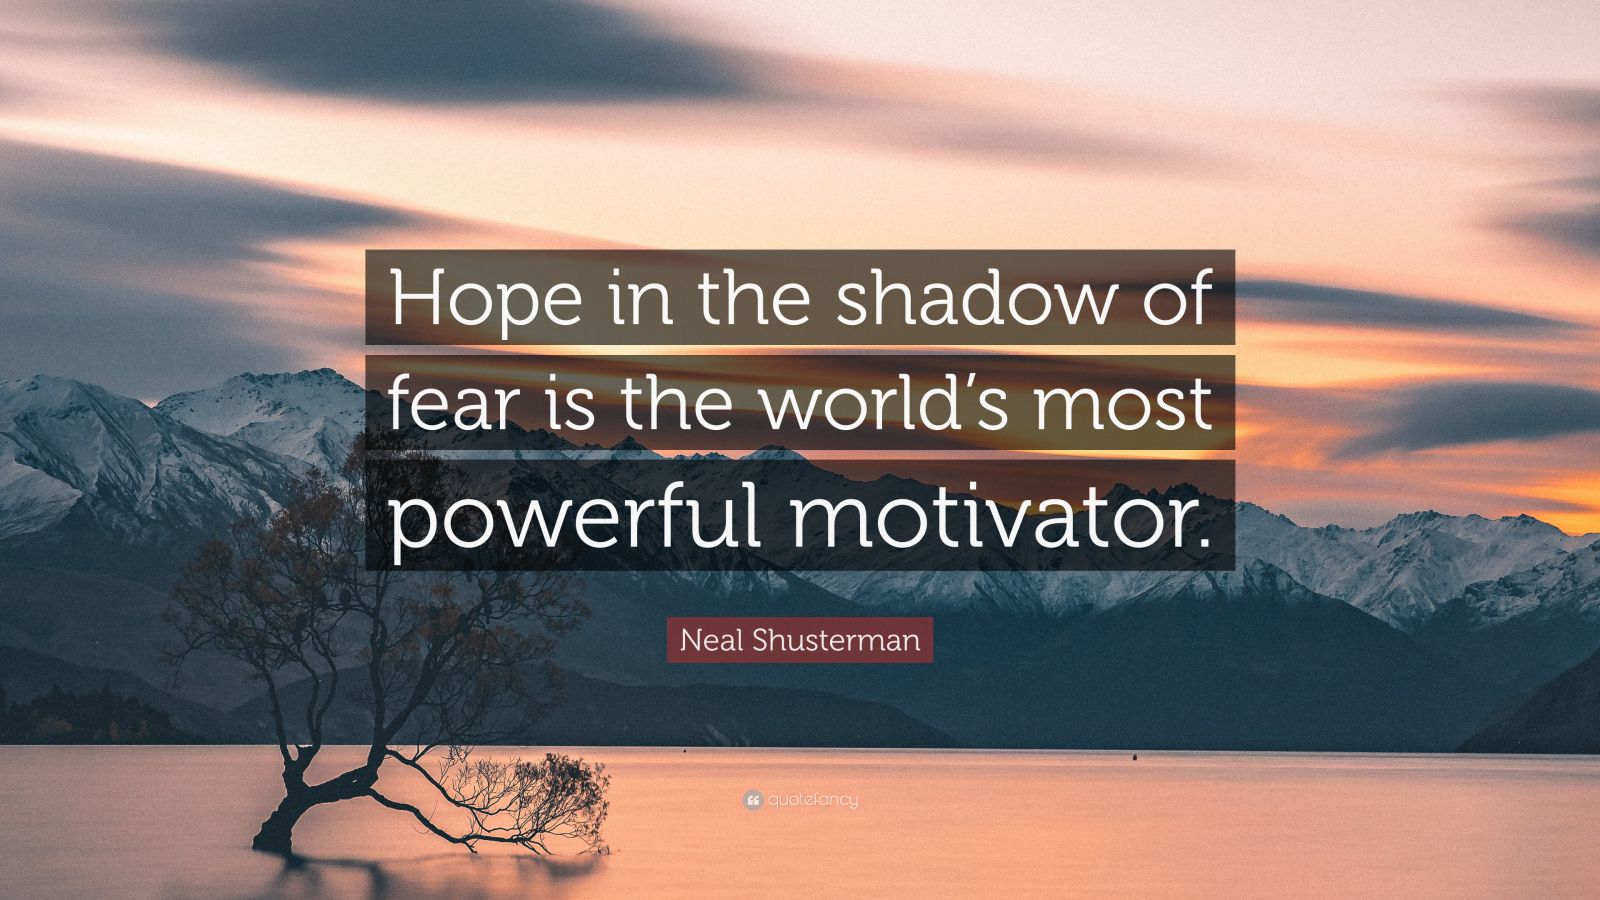 Neal Shusterman Quote: “Hope in the shadow of fear is the world’s most